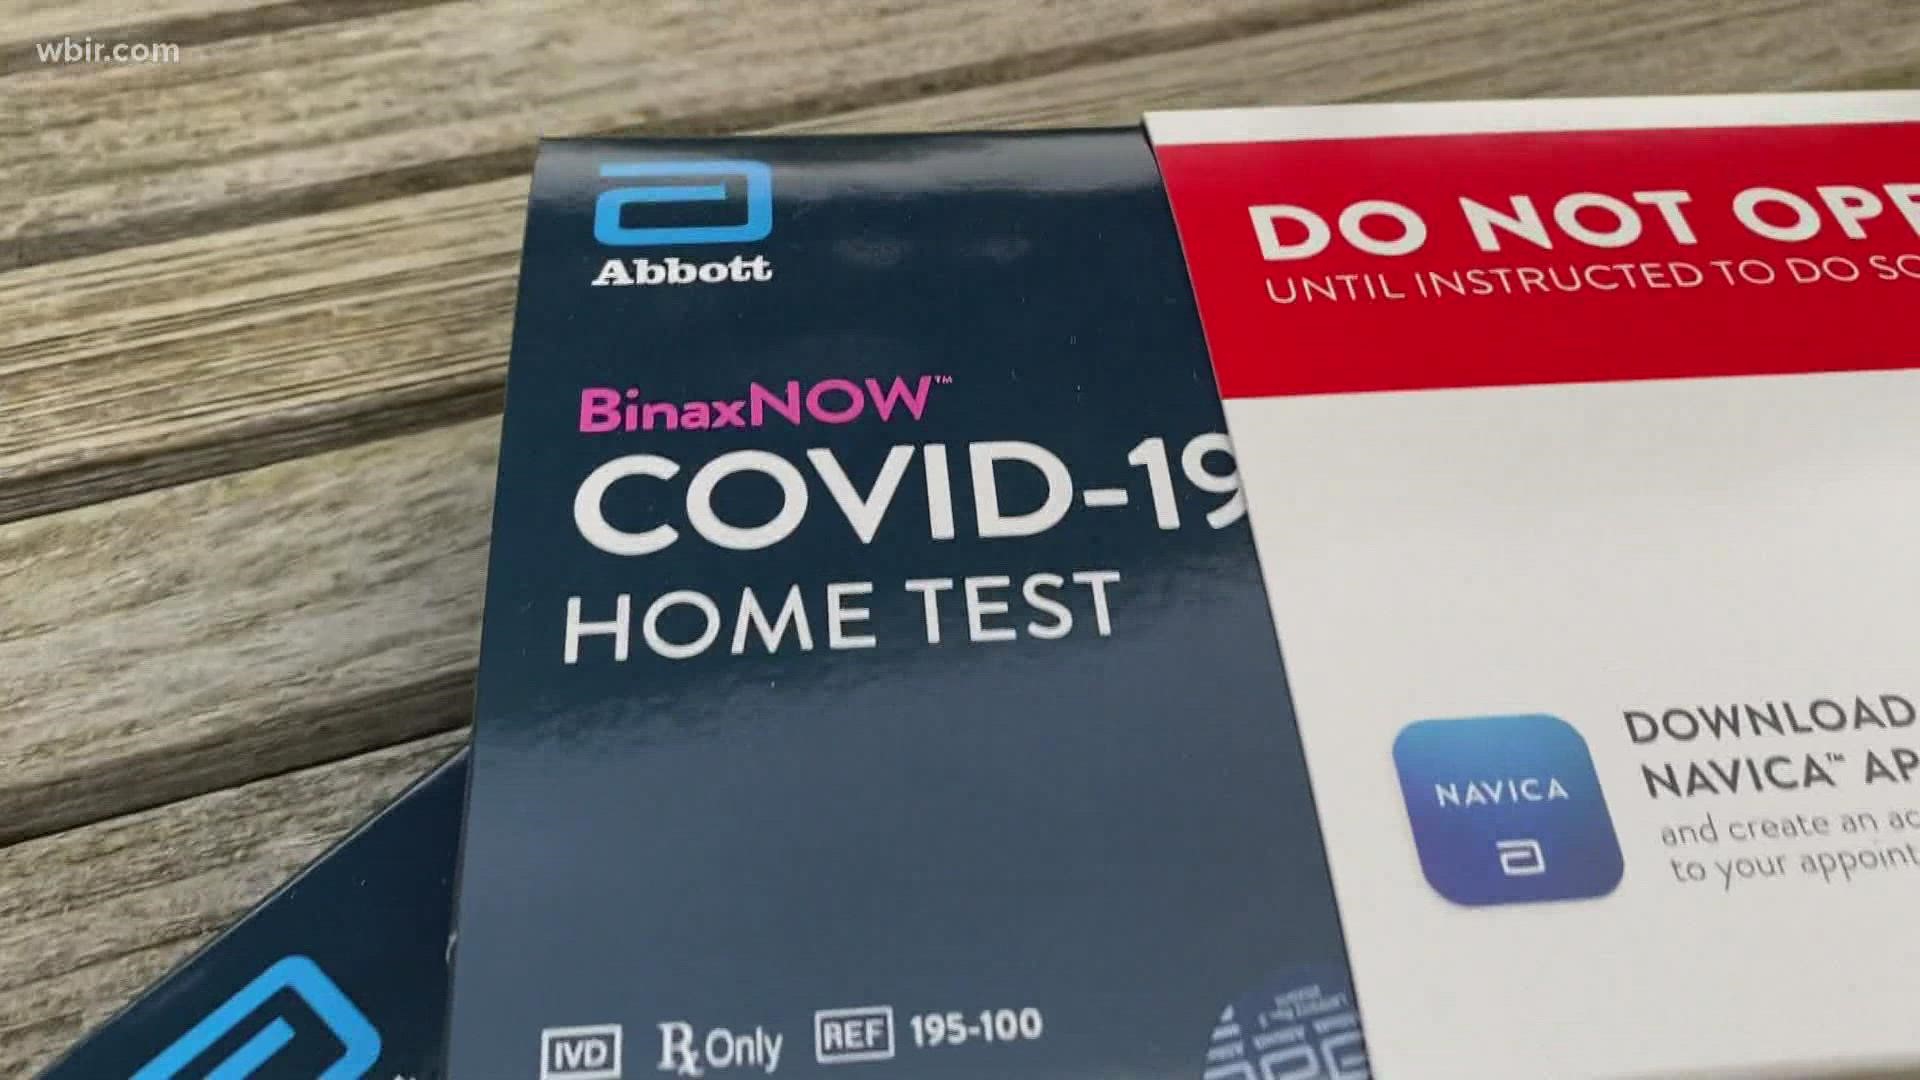 President Joe Biden said more than 500 million at-home tests would be available for Americans starting in January.